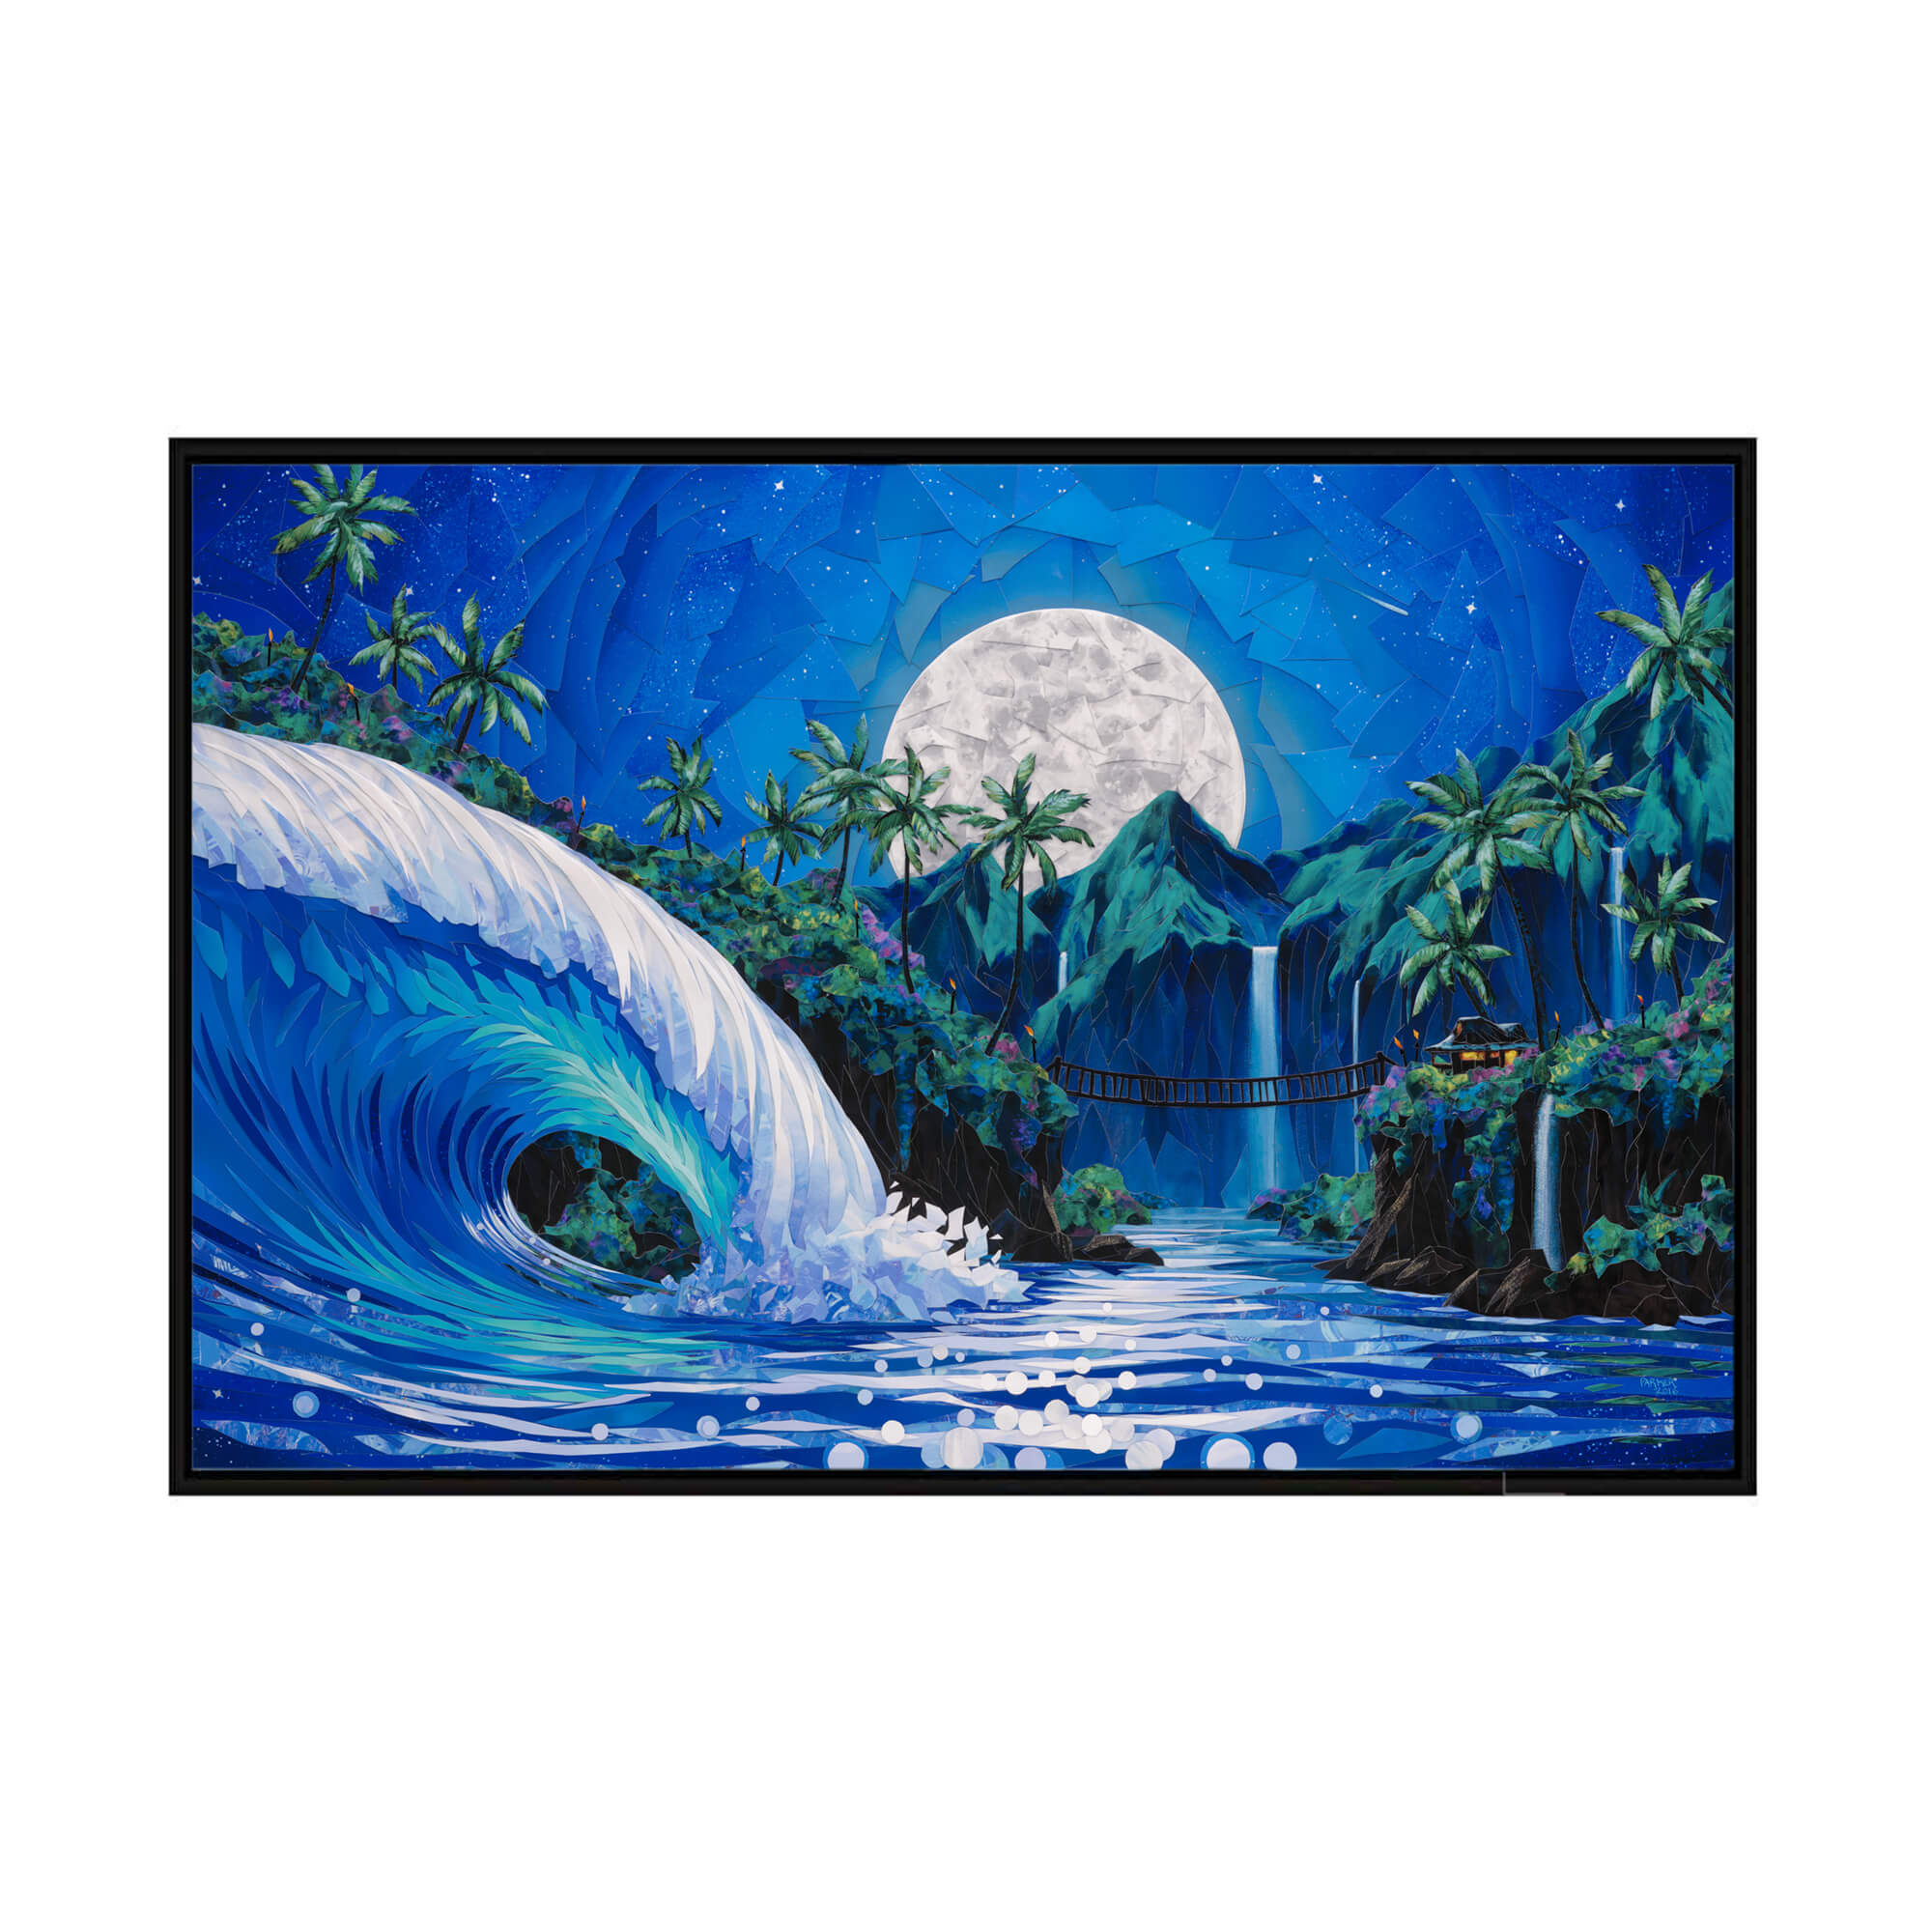 A framed canvas giclée art print featuring a collage of an evening view of a tropical landscape with a huge rolling wave, several waterfalls, and a full moon background by Hawaii artist Patrick Parker